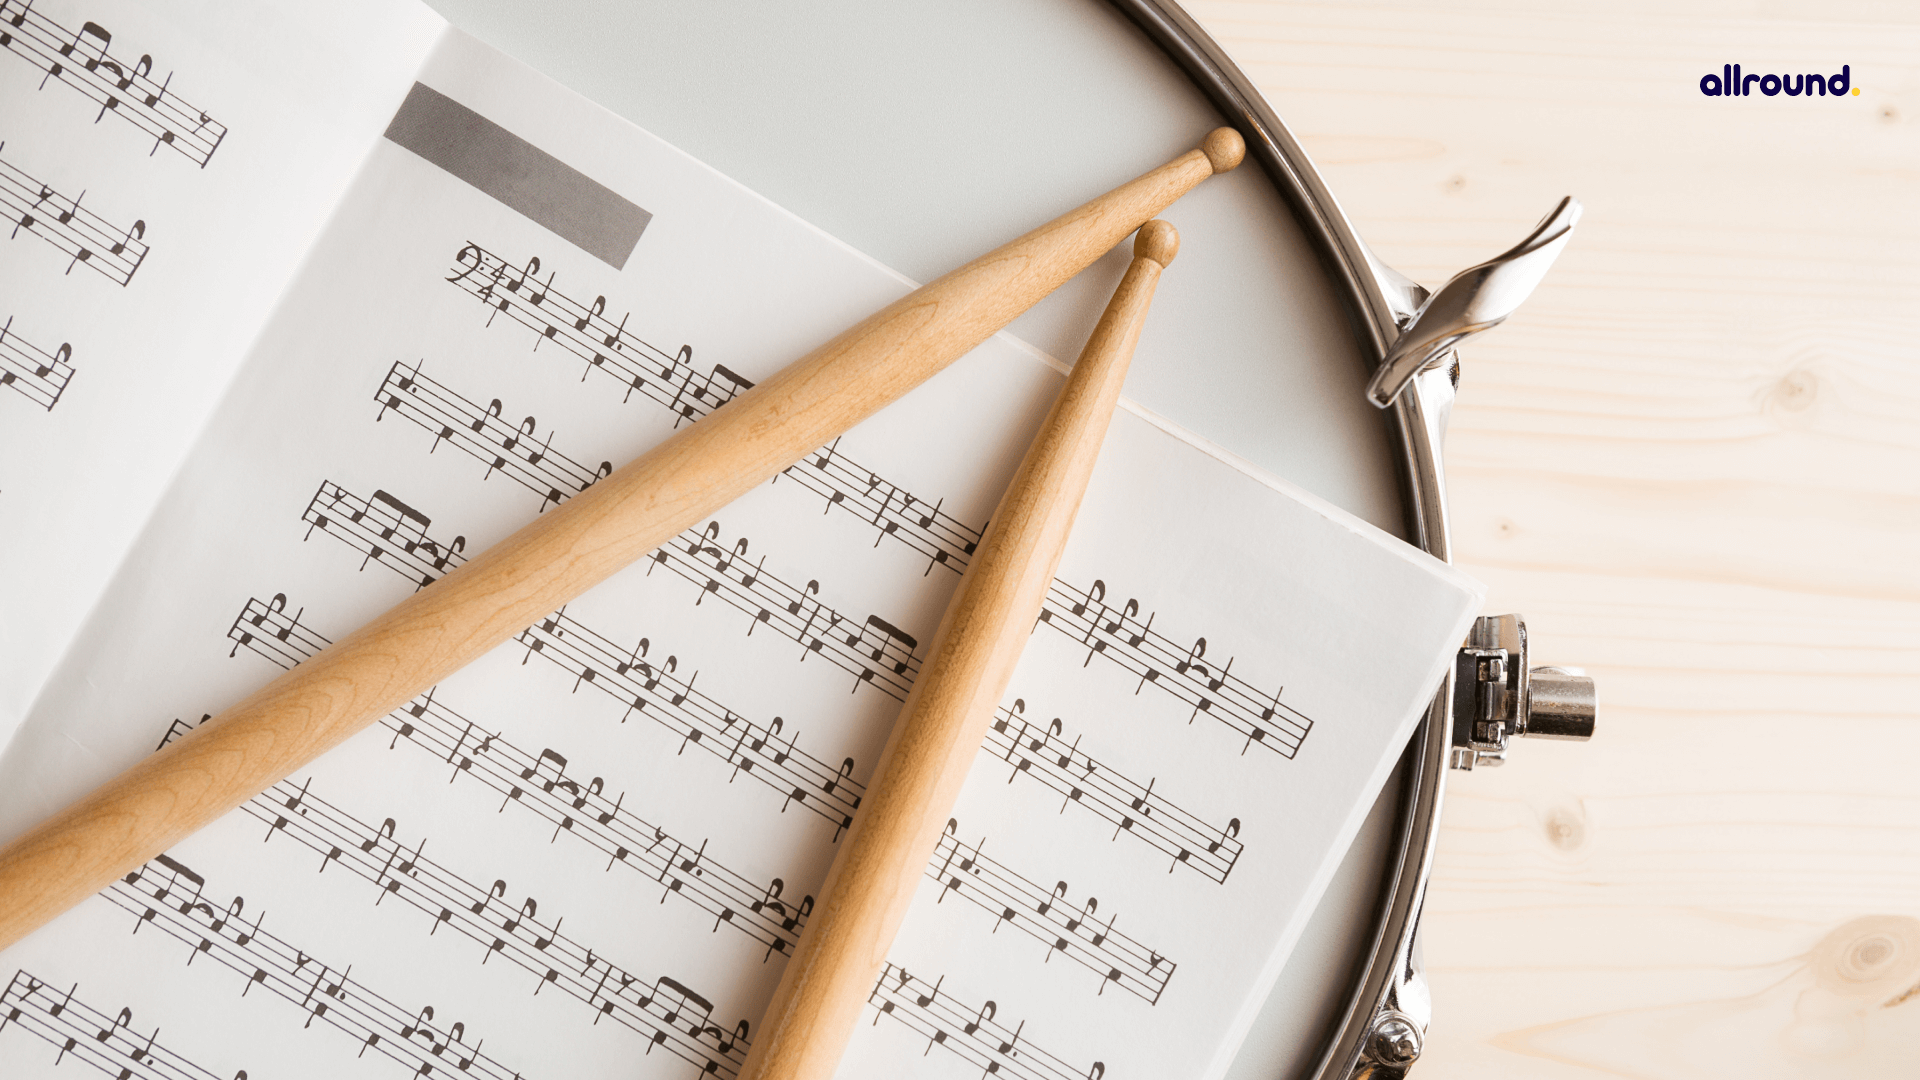 How to read drum sheet music